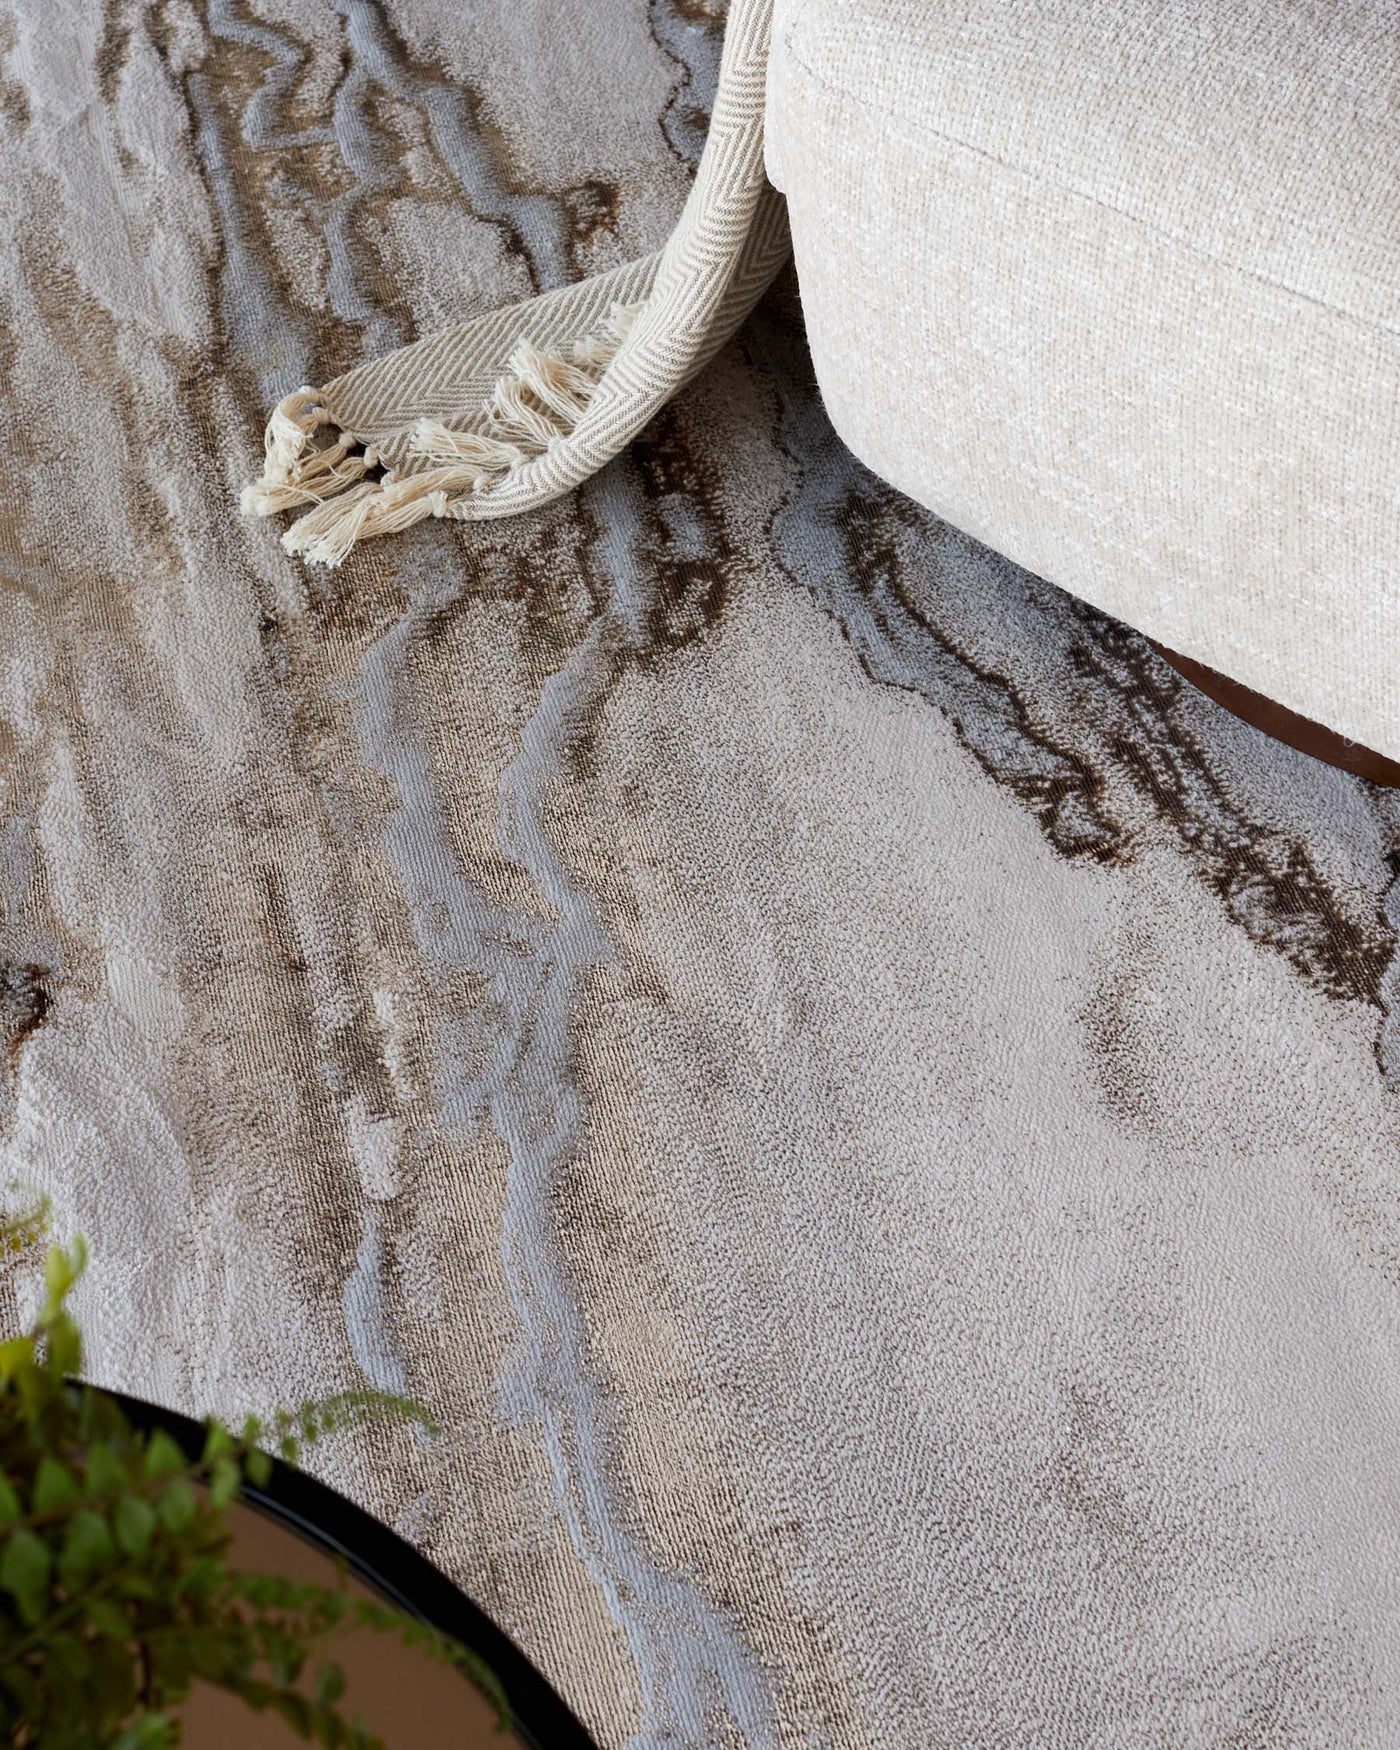 A close-up of a cream-colored fabric sofa with a textured throw blanket hanging over its side. Below is an abstract-patterned rug in shades of beige, cream, and dark brown with a hint of blue accent.